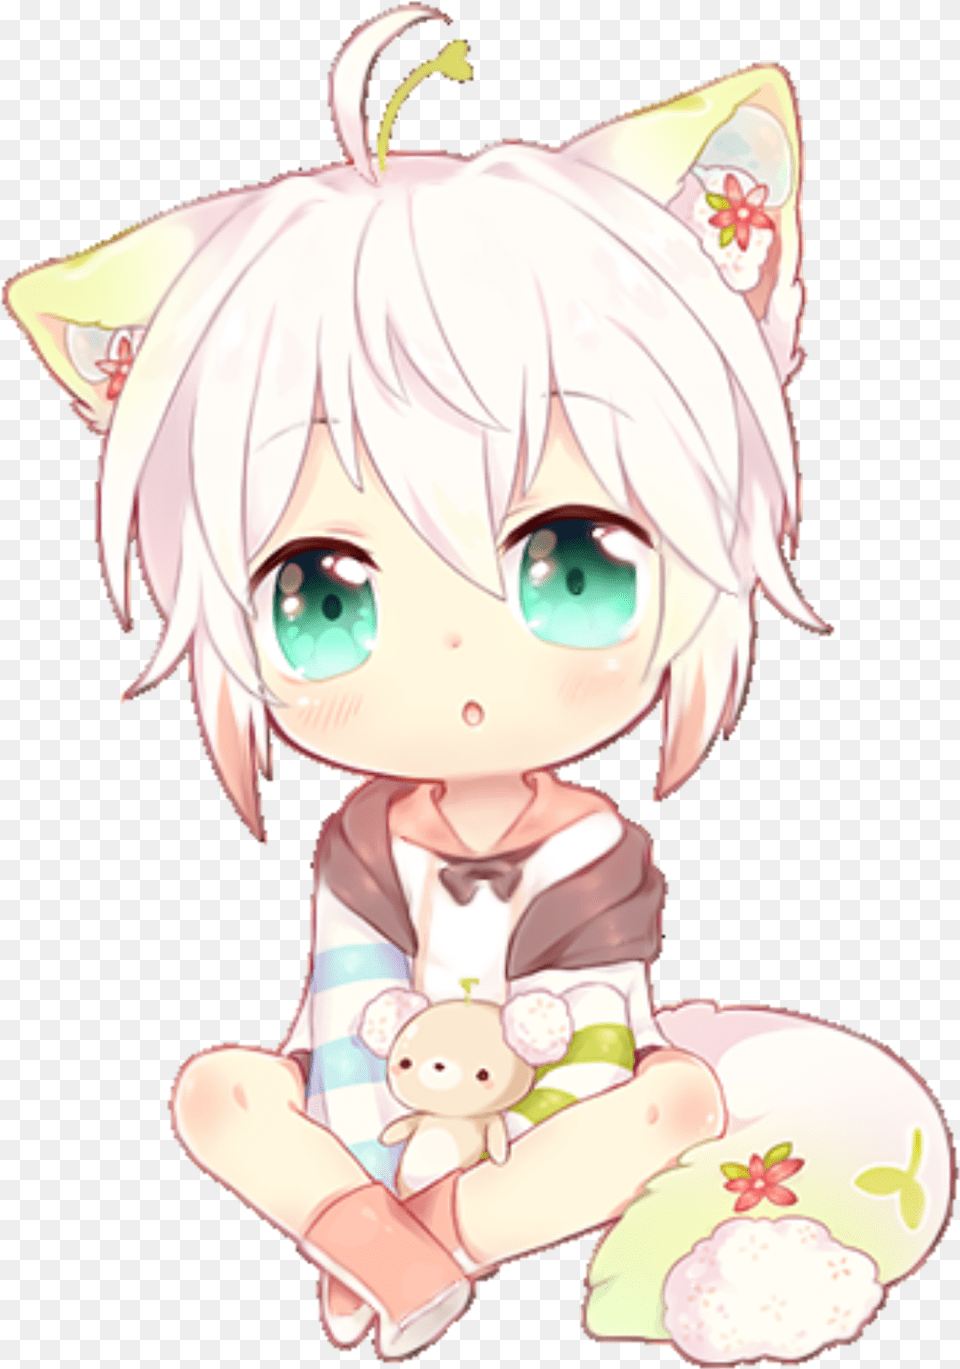 Anime Animeboy Cute Colorful Handpainted Acg Anime Chibi Cute Boy, Book, Comics, Publication, Baby Png